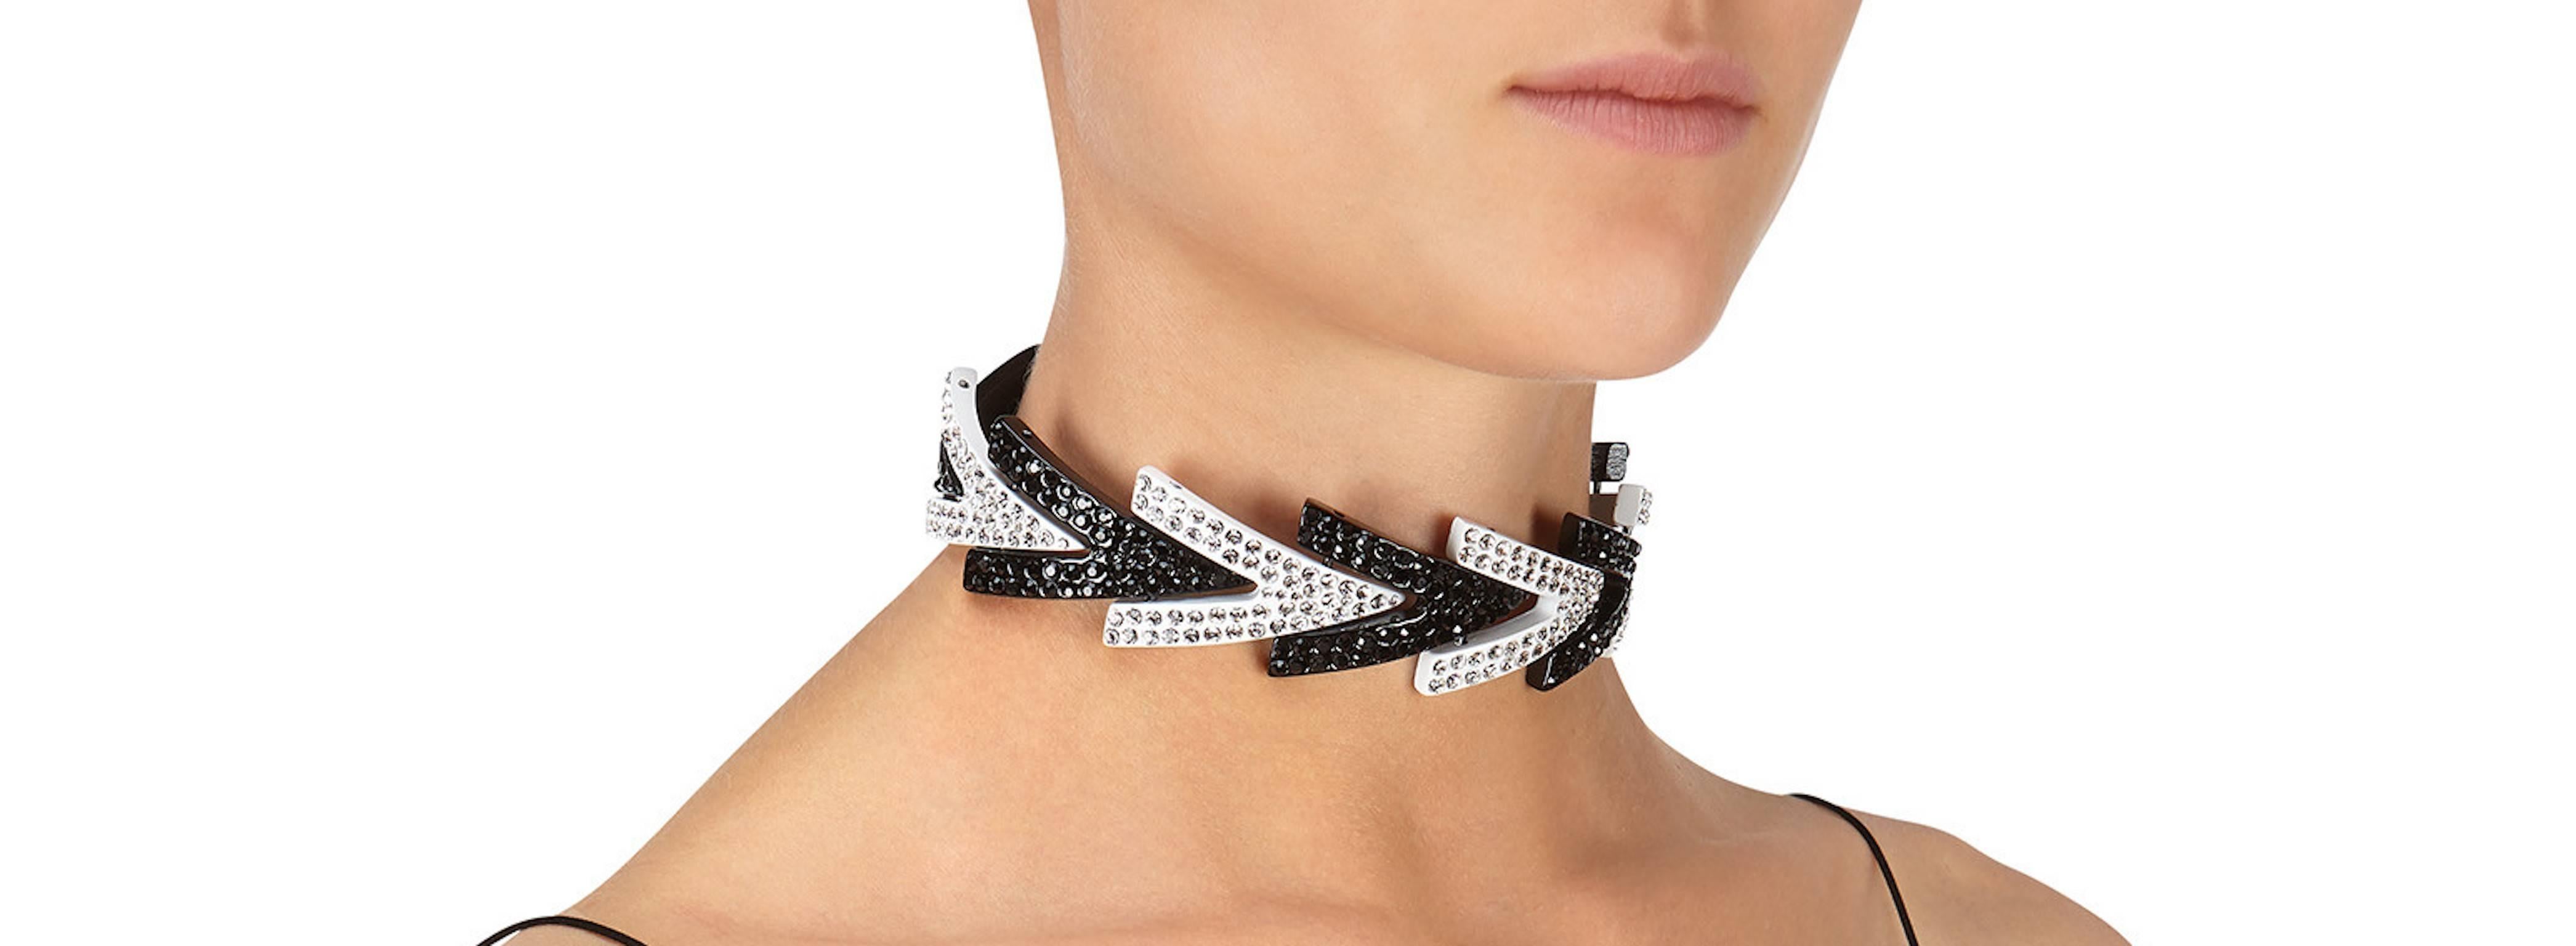 Giuseppe Zanotti NEW Black Silver Crystal Evening Choker Necklace
Metal
Crystal
Lobster claw closure
Made in Italy